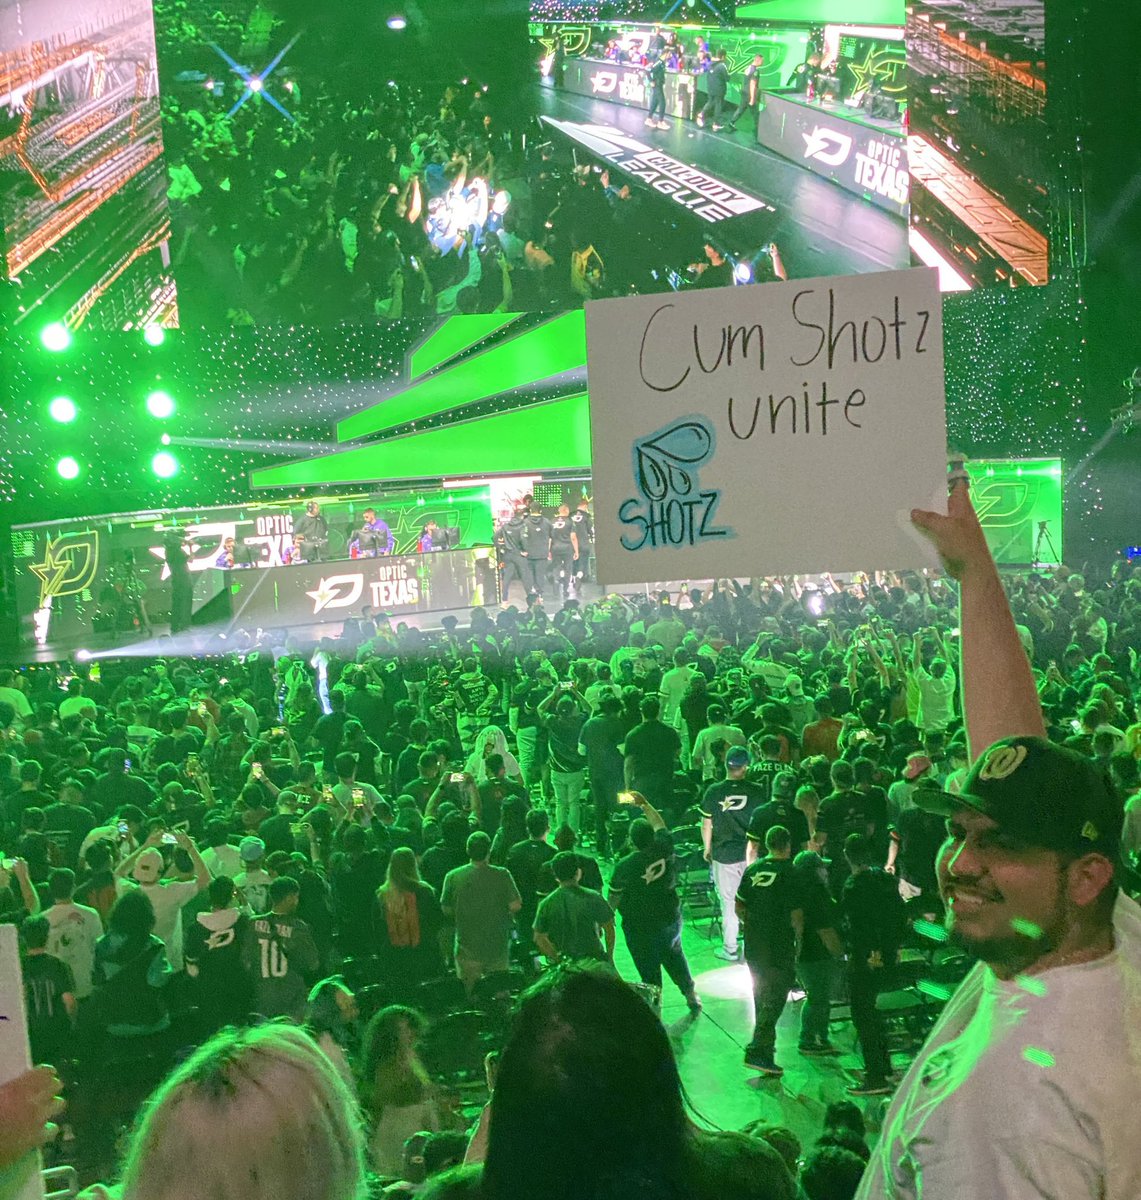 I regret to inform you all, that this viewer was kicked out of CoD Champs for a sign saying cum shotz unite, a reference to how OpTic Shotzzy refers to his viewers on stream

Entire weekend ban, mans spent over $1,000 to drive down for the event with his family. FREE HIM